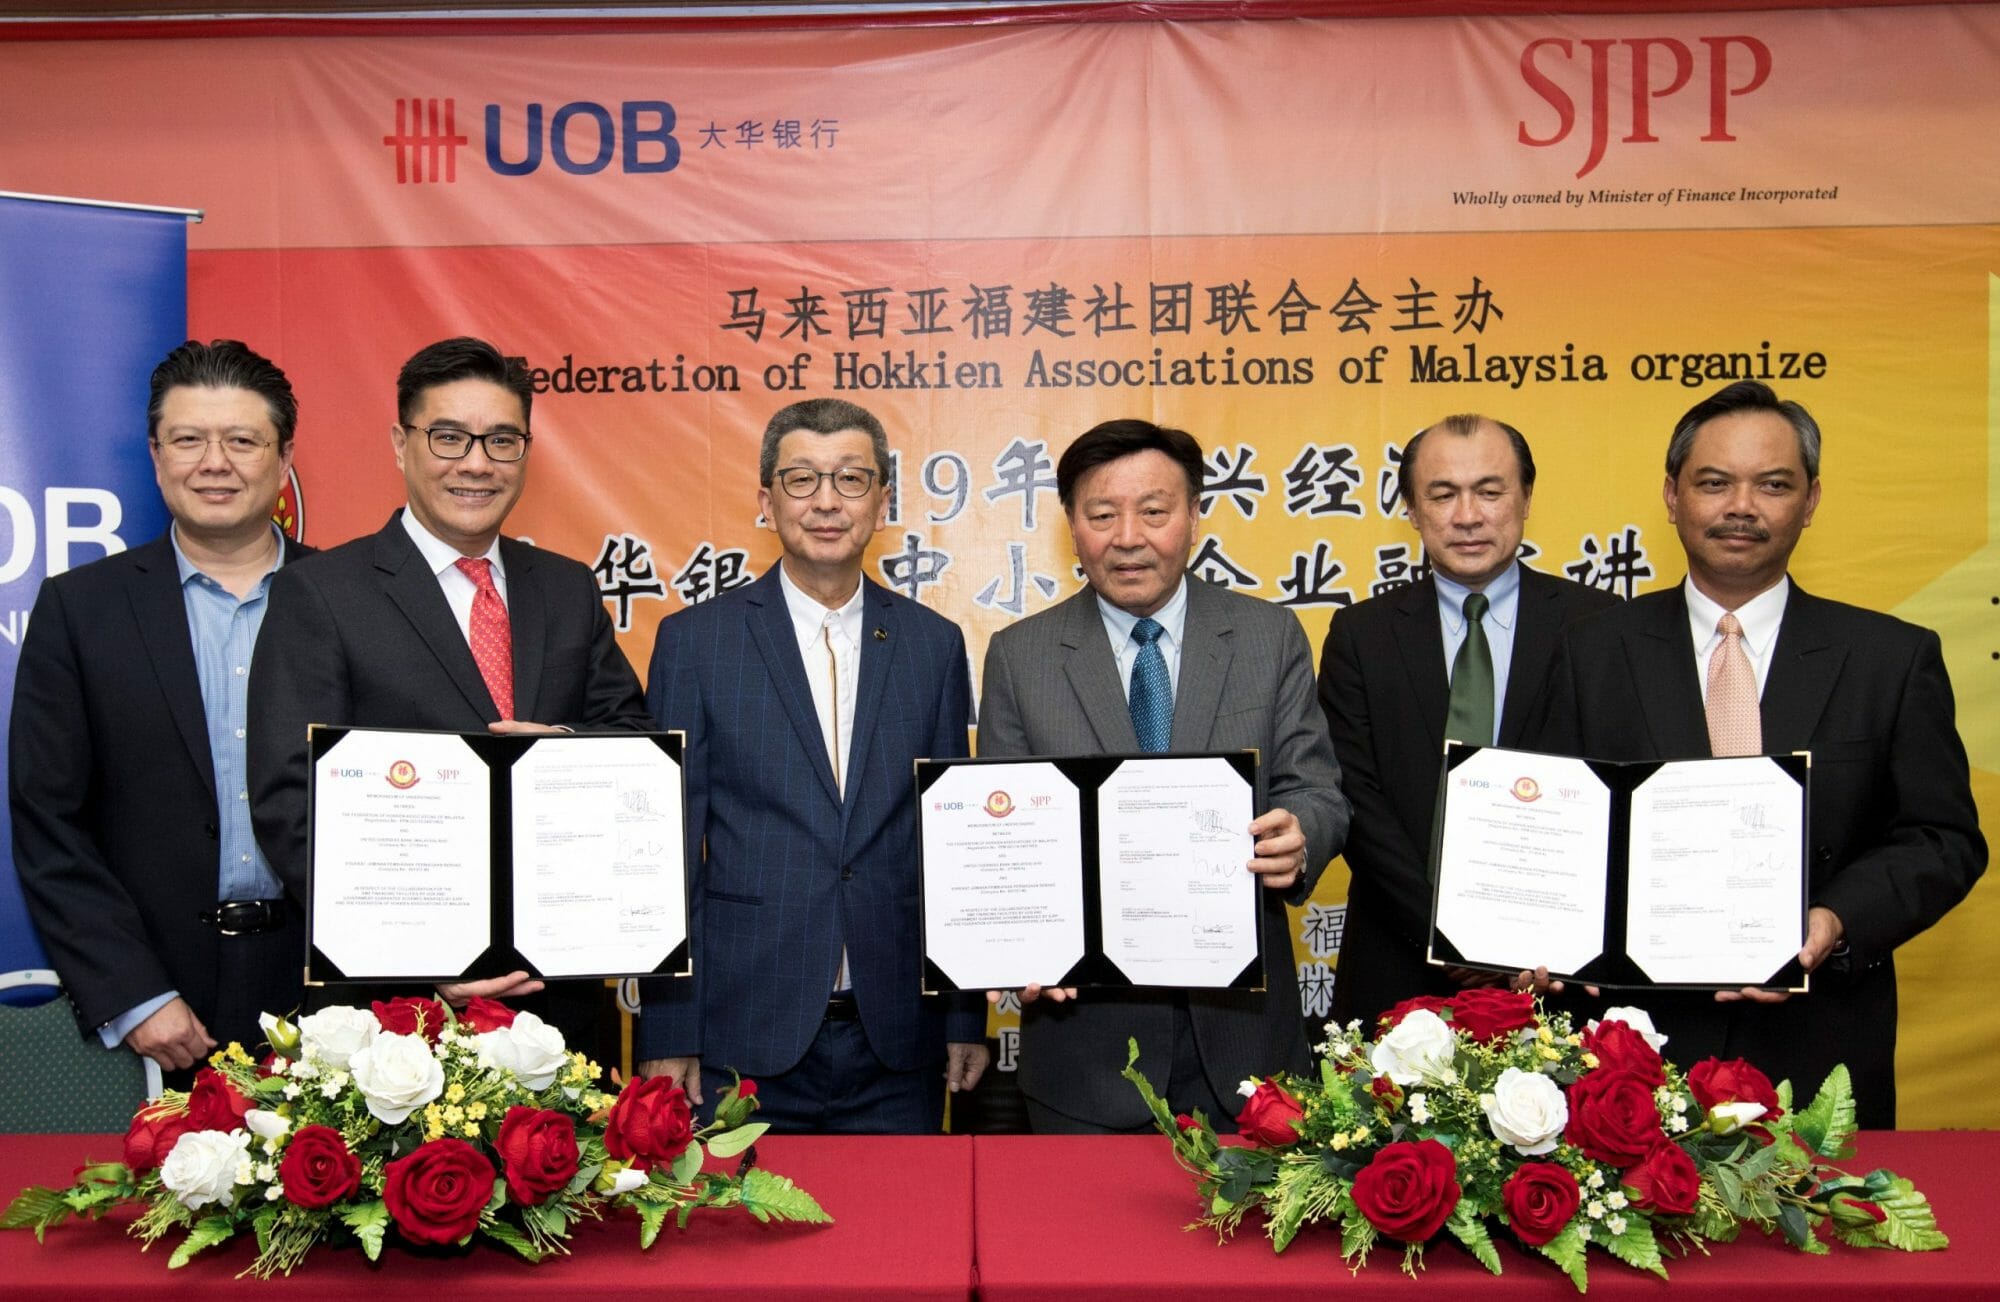 UOB Signs Pact To Offer CollateralFree Business Loans For SMEs